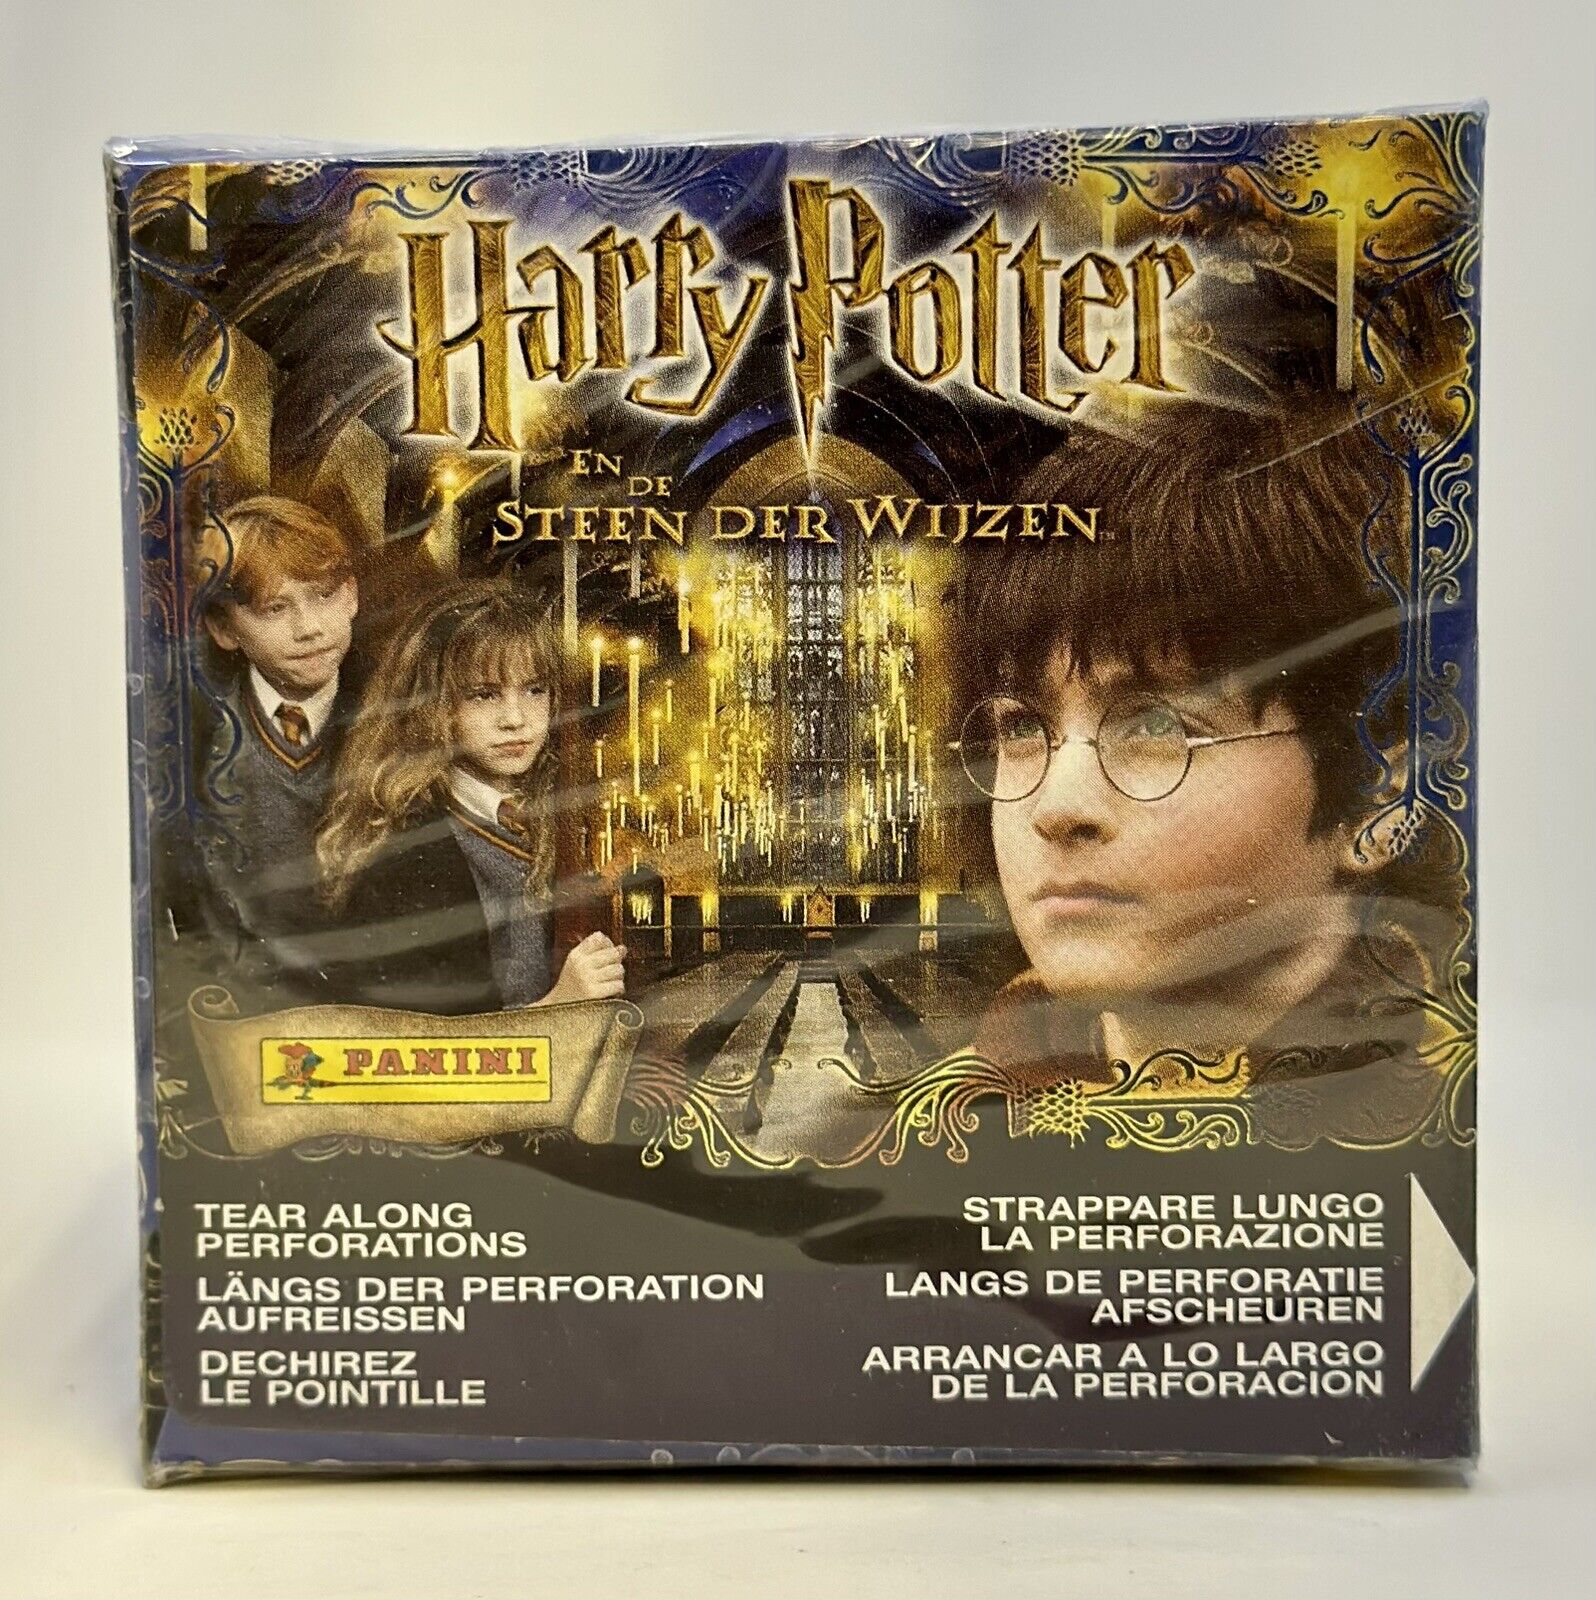 2001 Panini Harry Potter and the Philosopher's Stone Sealed Box 50 Packs Sticker